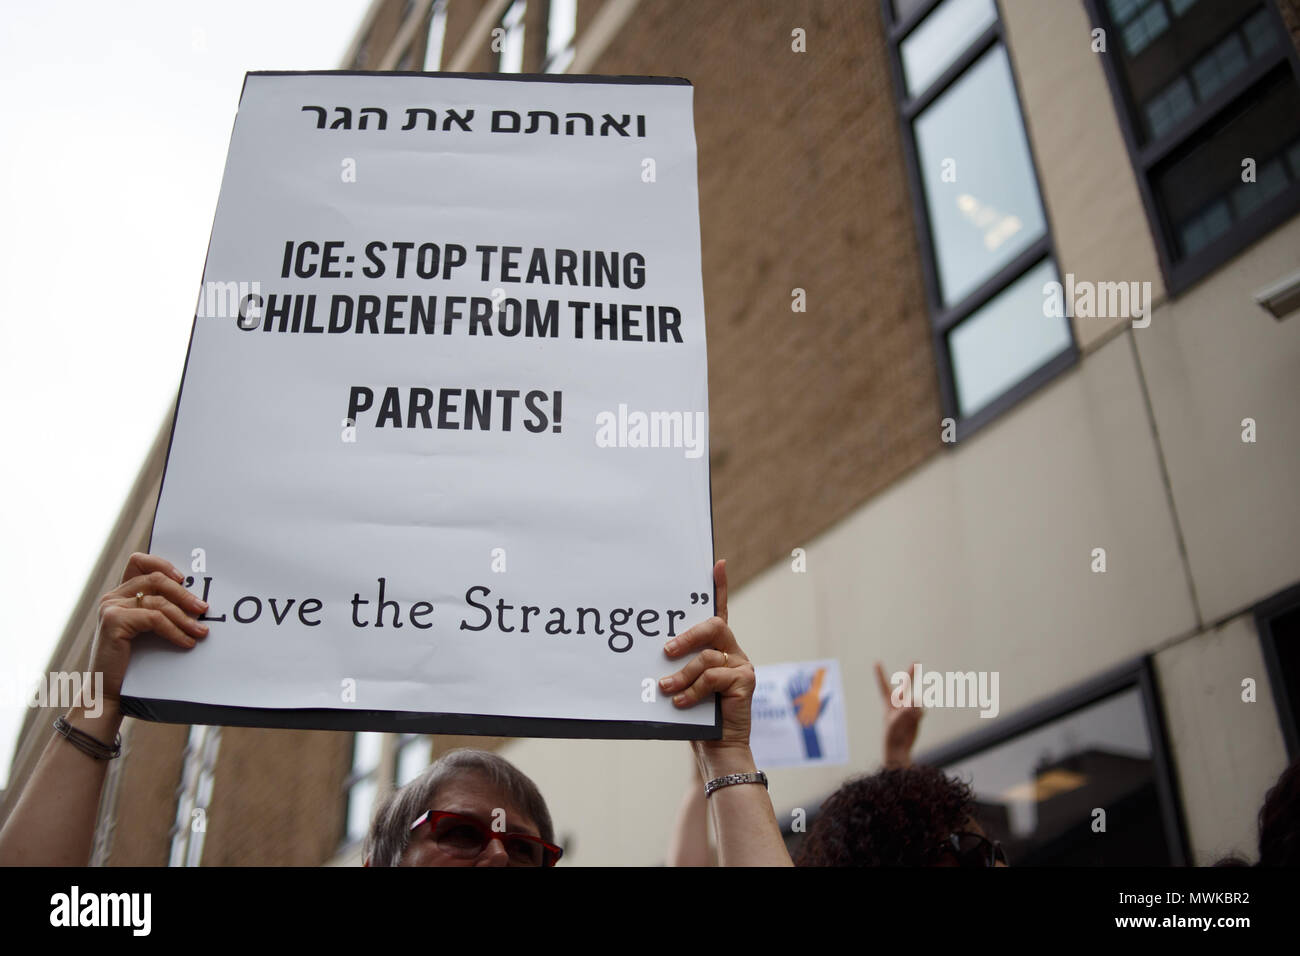 Philadelphia, United States. 01st June, 2018. Protestor holds a sign at a rally near the city's ICE (Immigration and Customs Enforcement) office, organized by the ACLU in opposition to new Trump administration policies which separate children entering the country from their parents or accompanying family members. Credit: Michael Candelori/Pacific Press/Alamy Live News Stock Photo